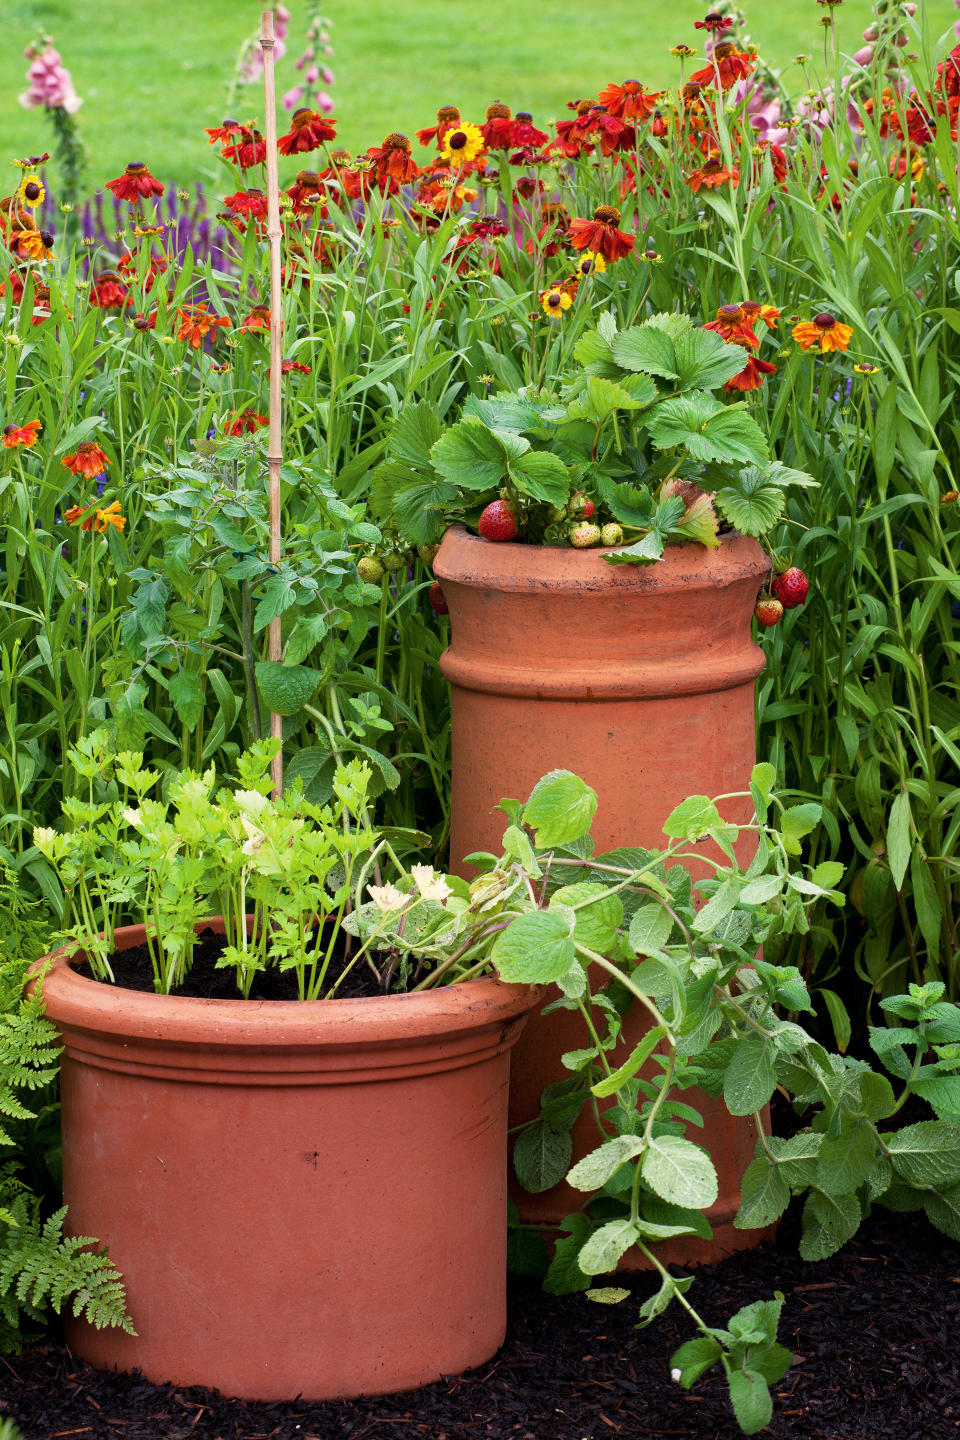 POSITION POTS AMONG THE FLOWERS